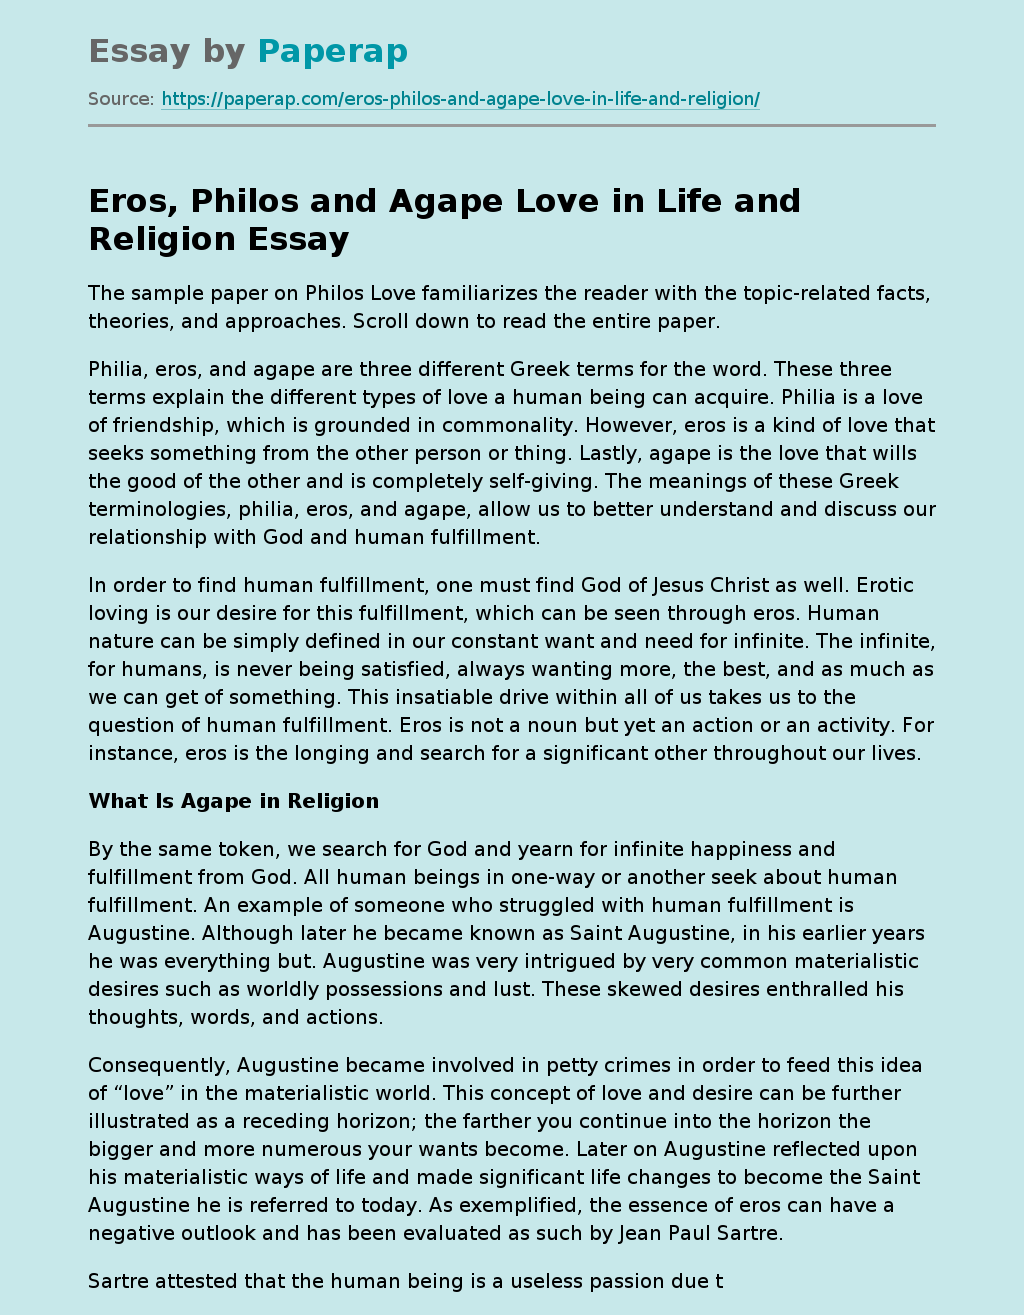 Eros, Philos and Agape Love in Life and Religion